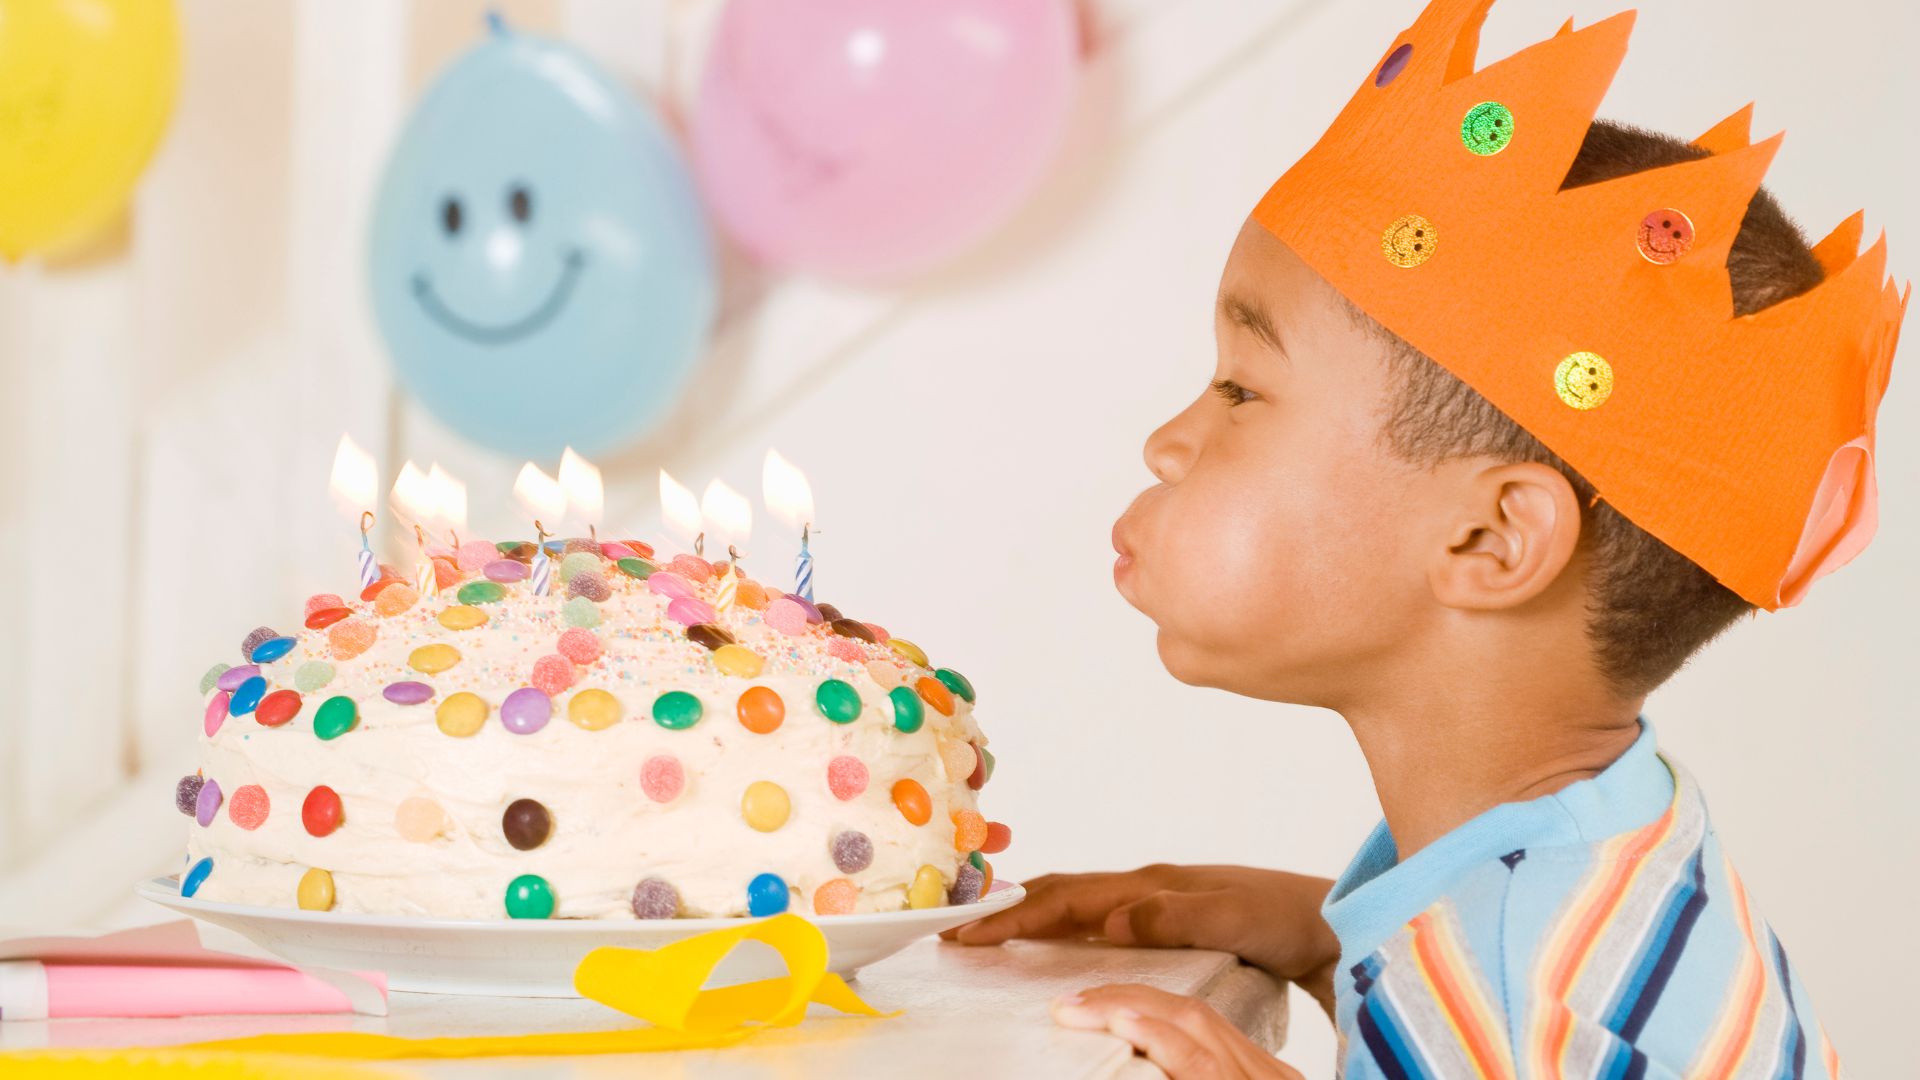 Easy birthday cake ideas - Early Learning Center Ormeau QLD